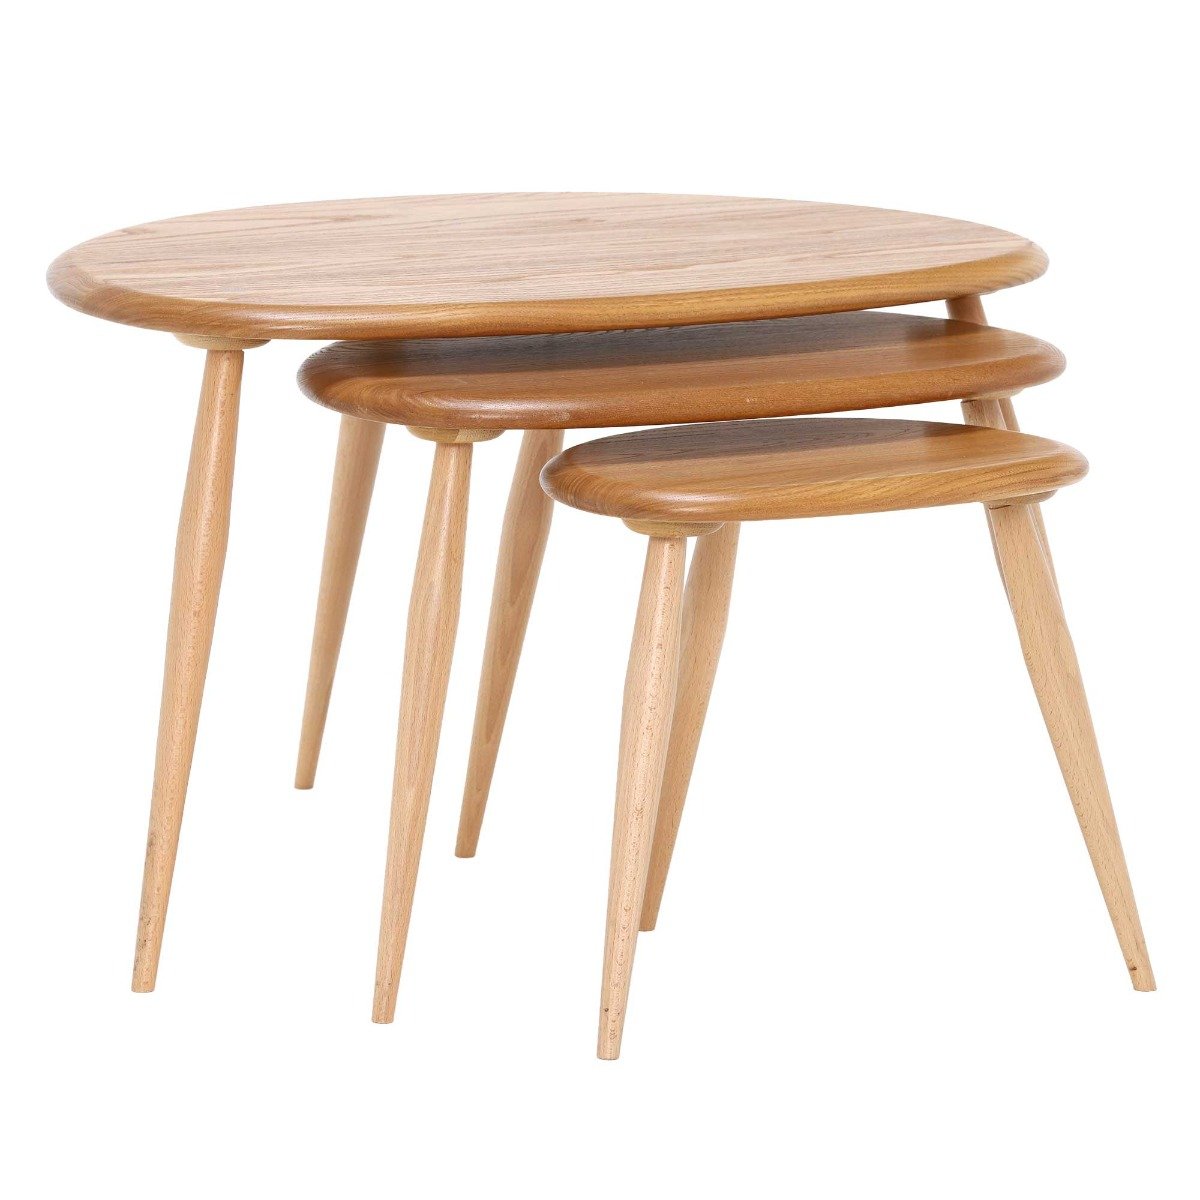 Ercol Pebble Nest Of Tables, Round, Brown | Barker & Stonehouse